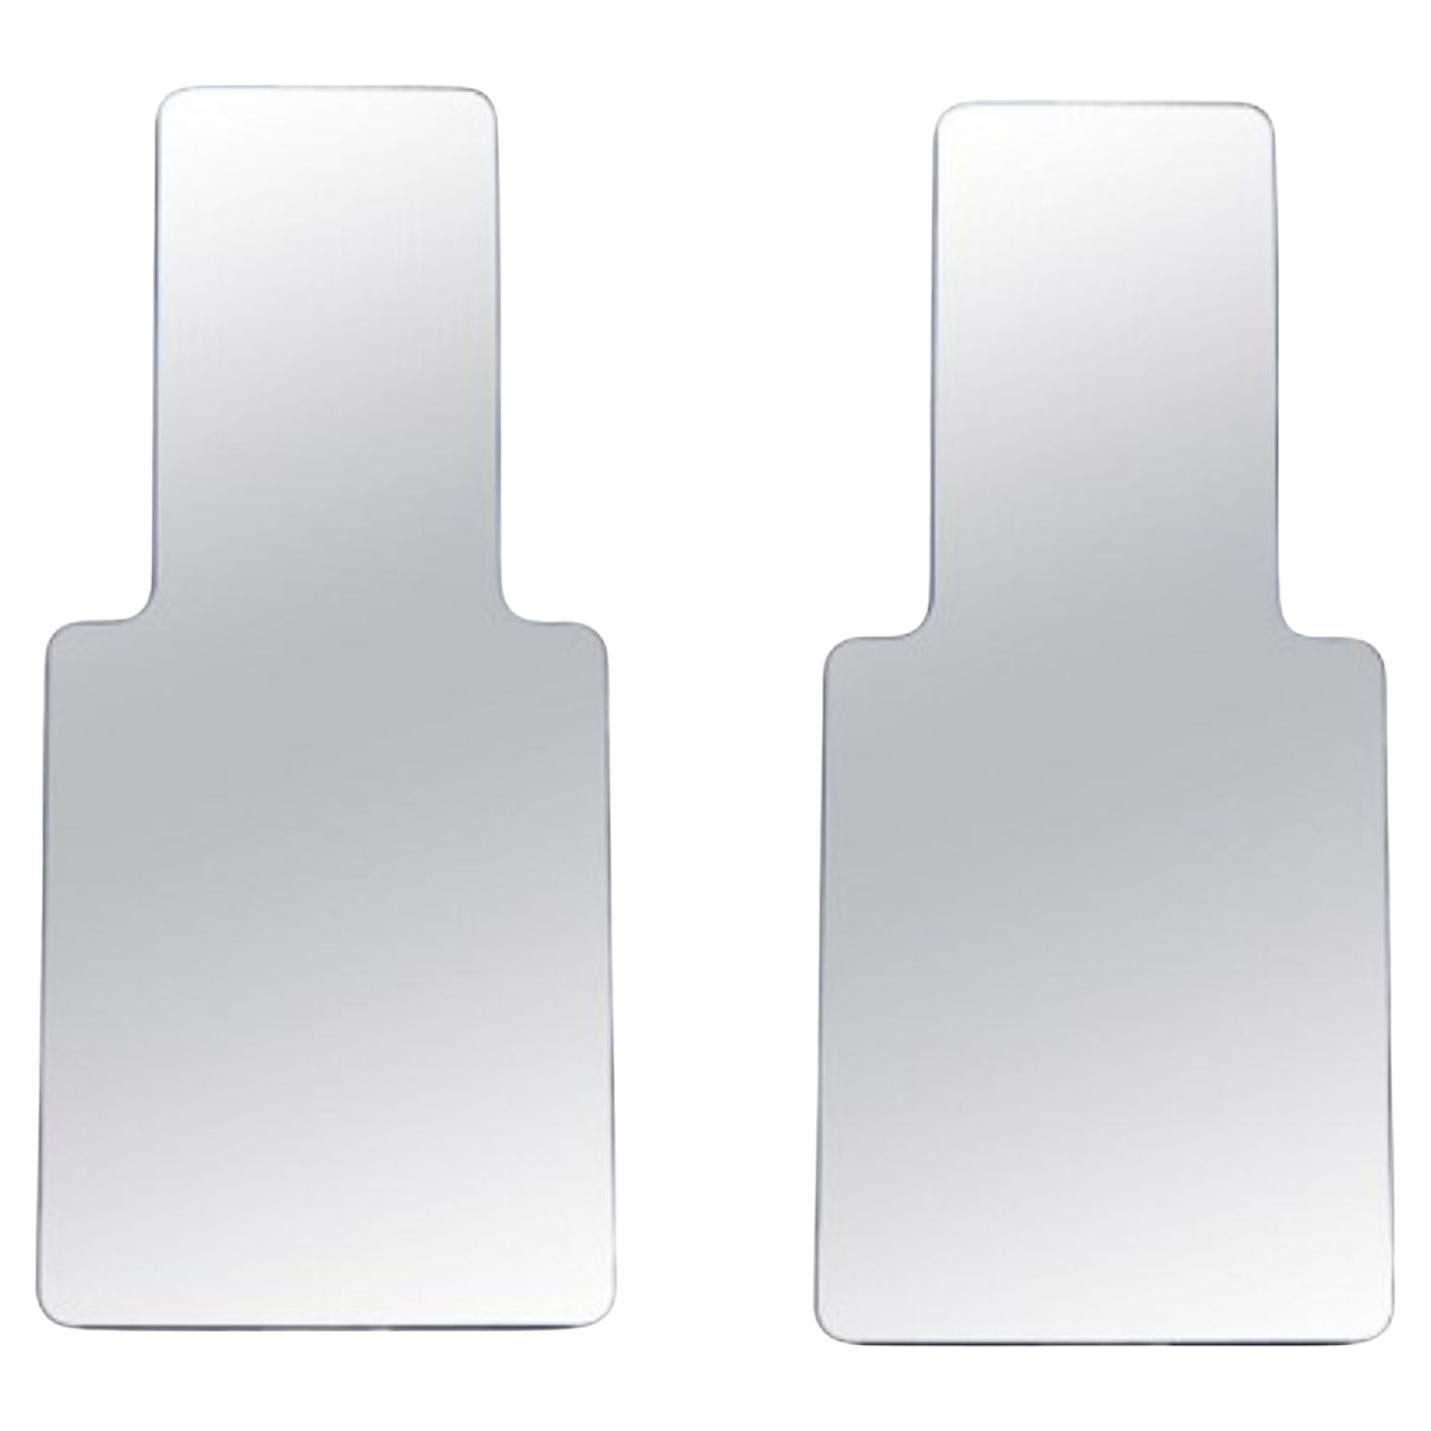 Set of 2 Loveself 03 Mirrors by Oito